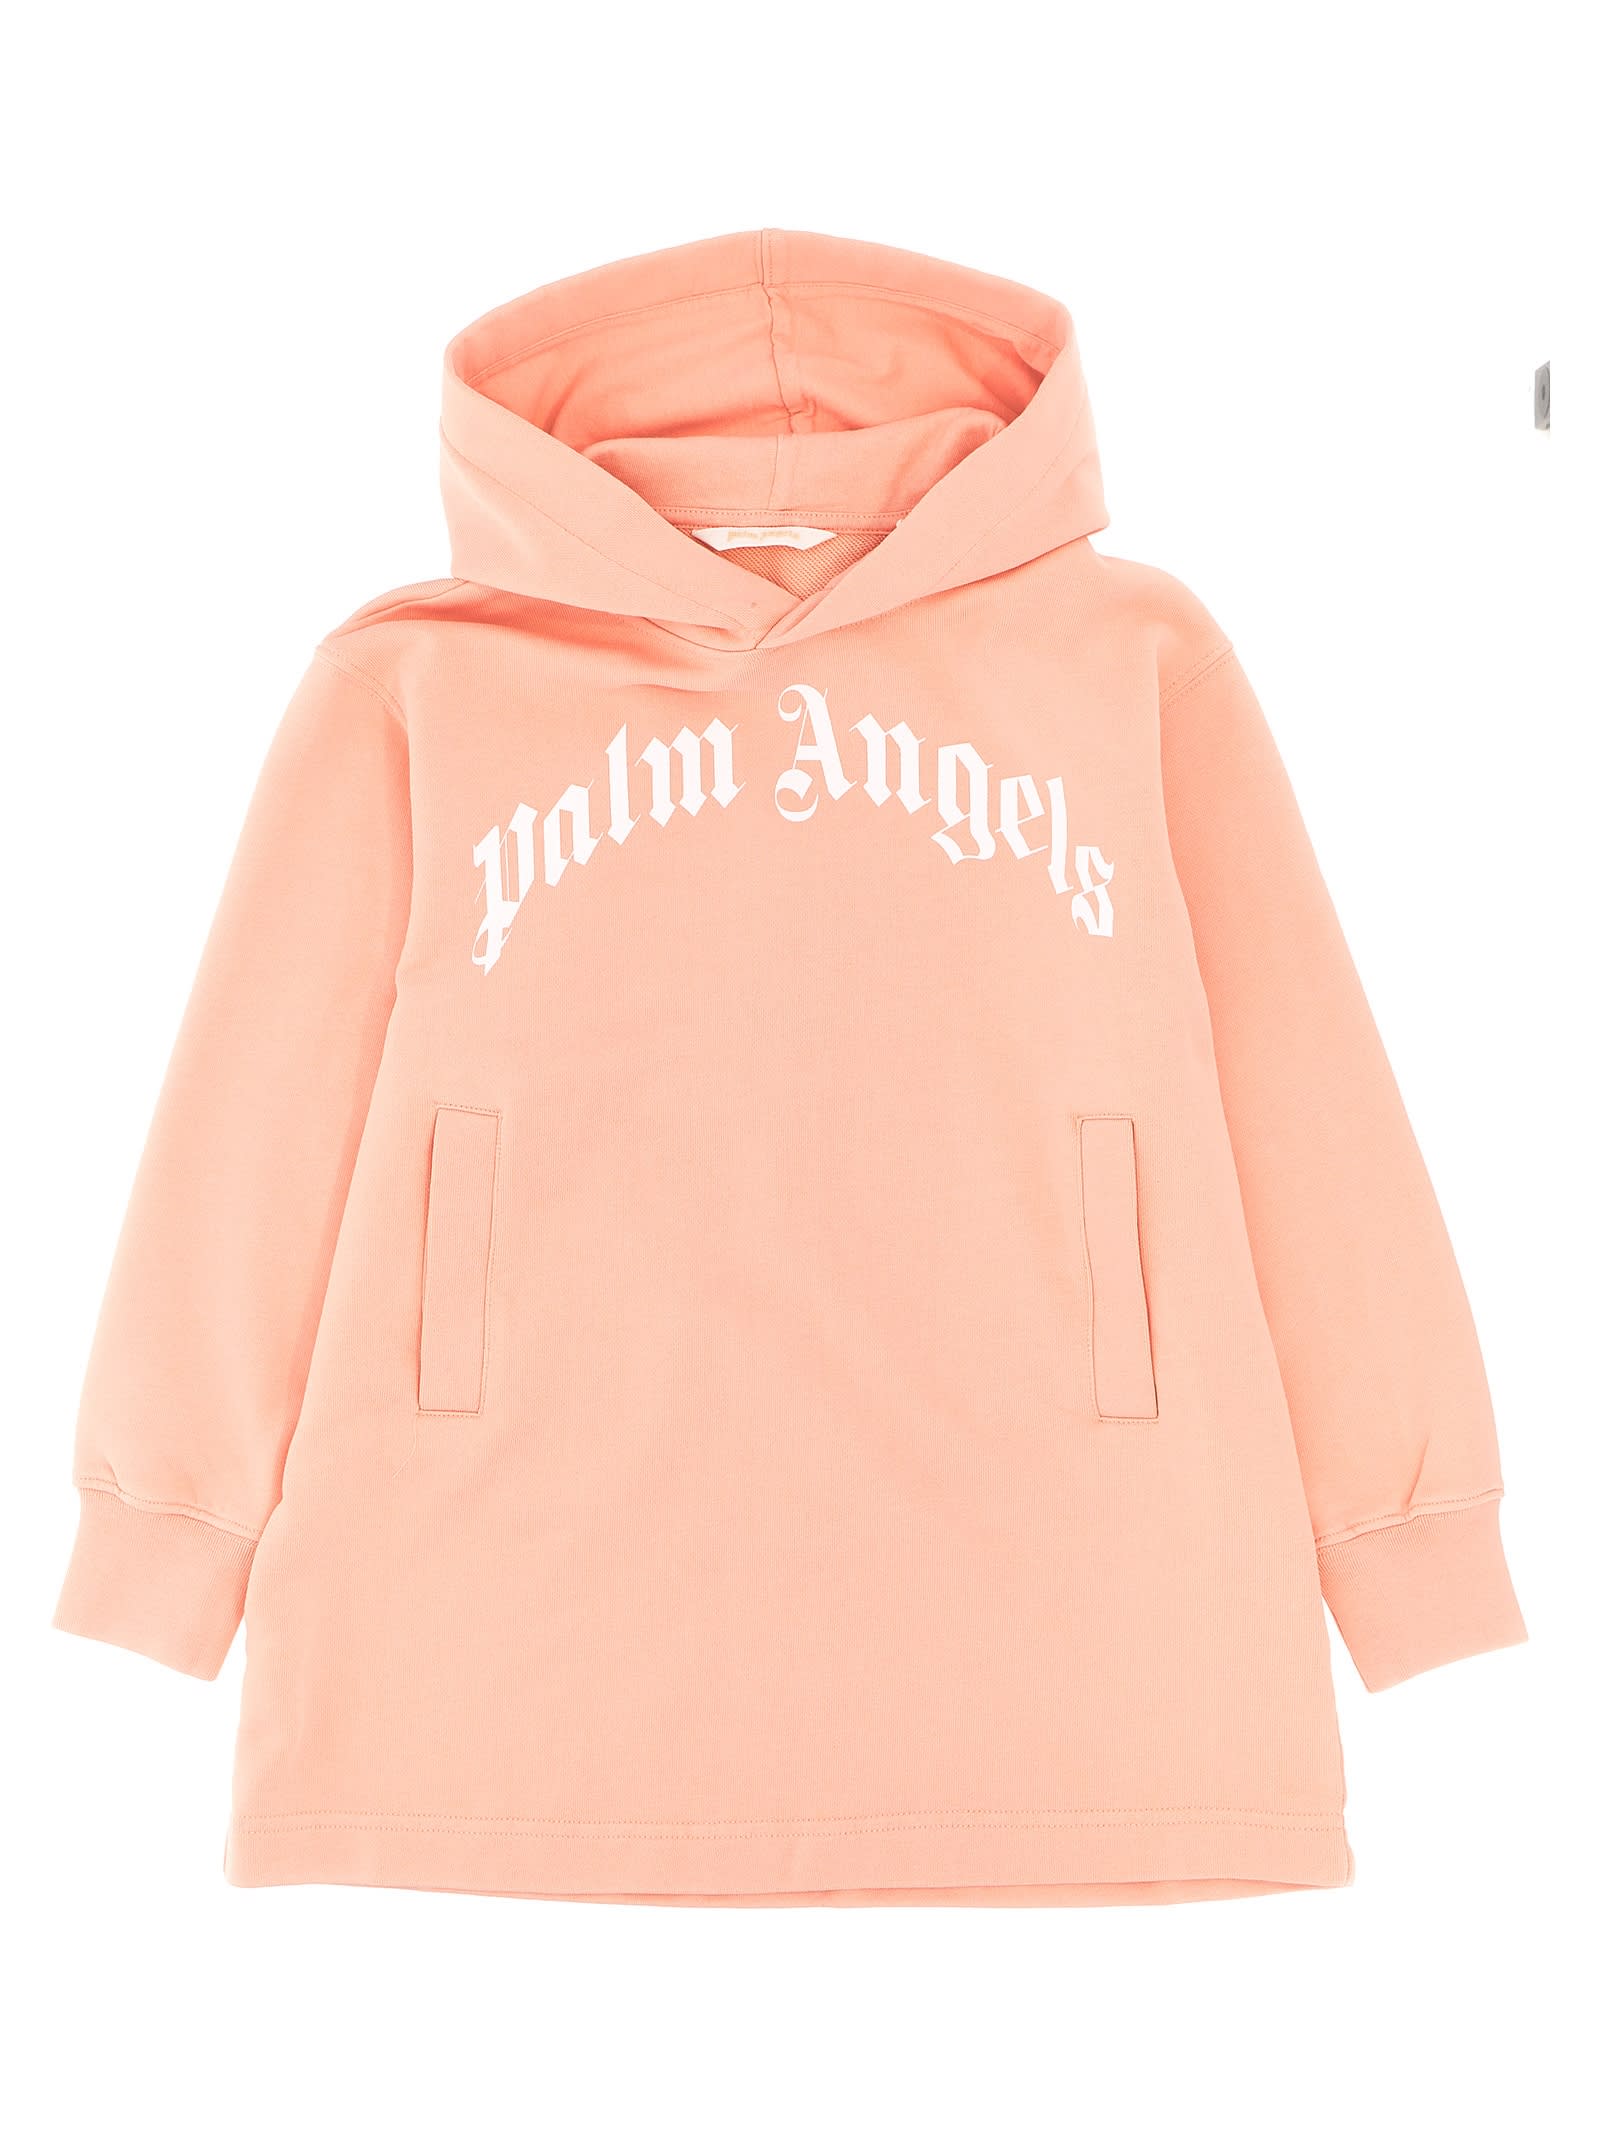 Palm Angels classic Curved Logo Hooded Dress